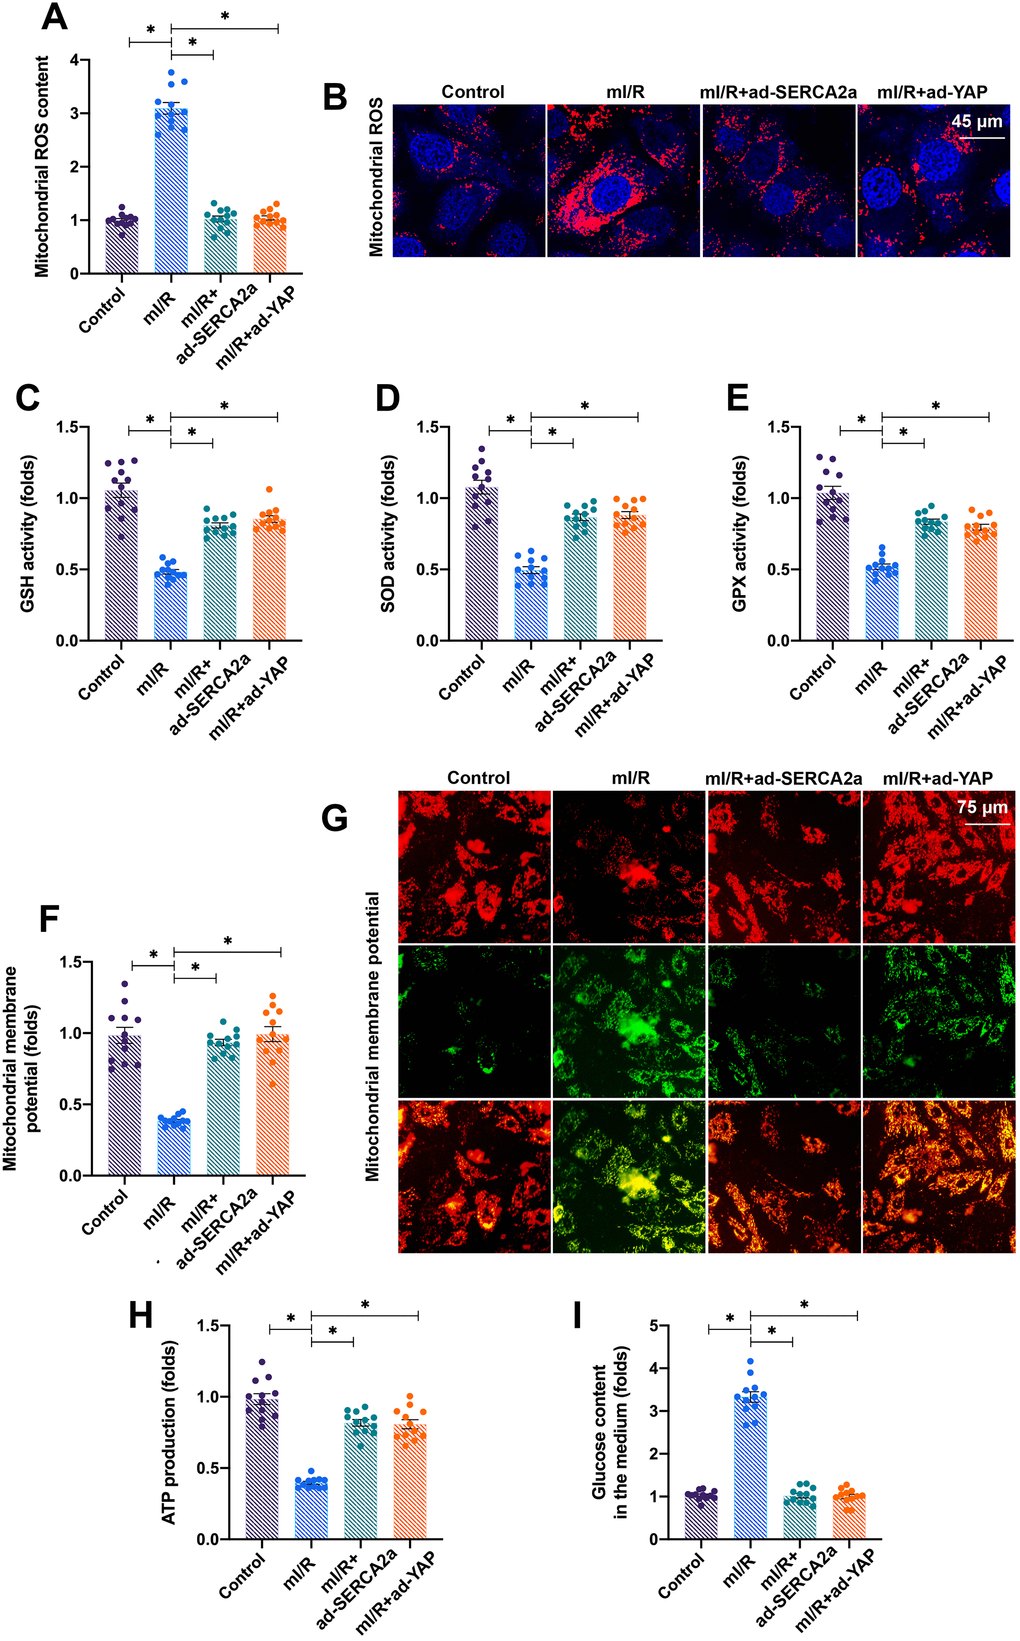 Activation of the YAP/SERCA2a pathway reduces mitochondrial damage in I/R-treated cardiomyocytes. (A, B) Immunofluorescence assay was used to detect the levels of mitochondrial ROS in cardiomyocytes transfected with ad-SERCA2a or ad-YAP in the presence of mI/R injury. (C–E) The activities of glutathione (GSH), superoxide dismutase (SOD), and glutathione peroxidase (GPx) were measured via enzyme-linked immunosorbent assay (ELISA) in cardiomyocytes transfected with ad-SERCA2a or ad-YAP in the presence of mI/R injury. (F, G) Mitochondrial membrane potential was measured using JC-1 staining. (H) ATP production was analyzed through ELISA. (I) The levels of glucose in the medium were determined by ELISA. *P